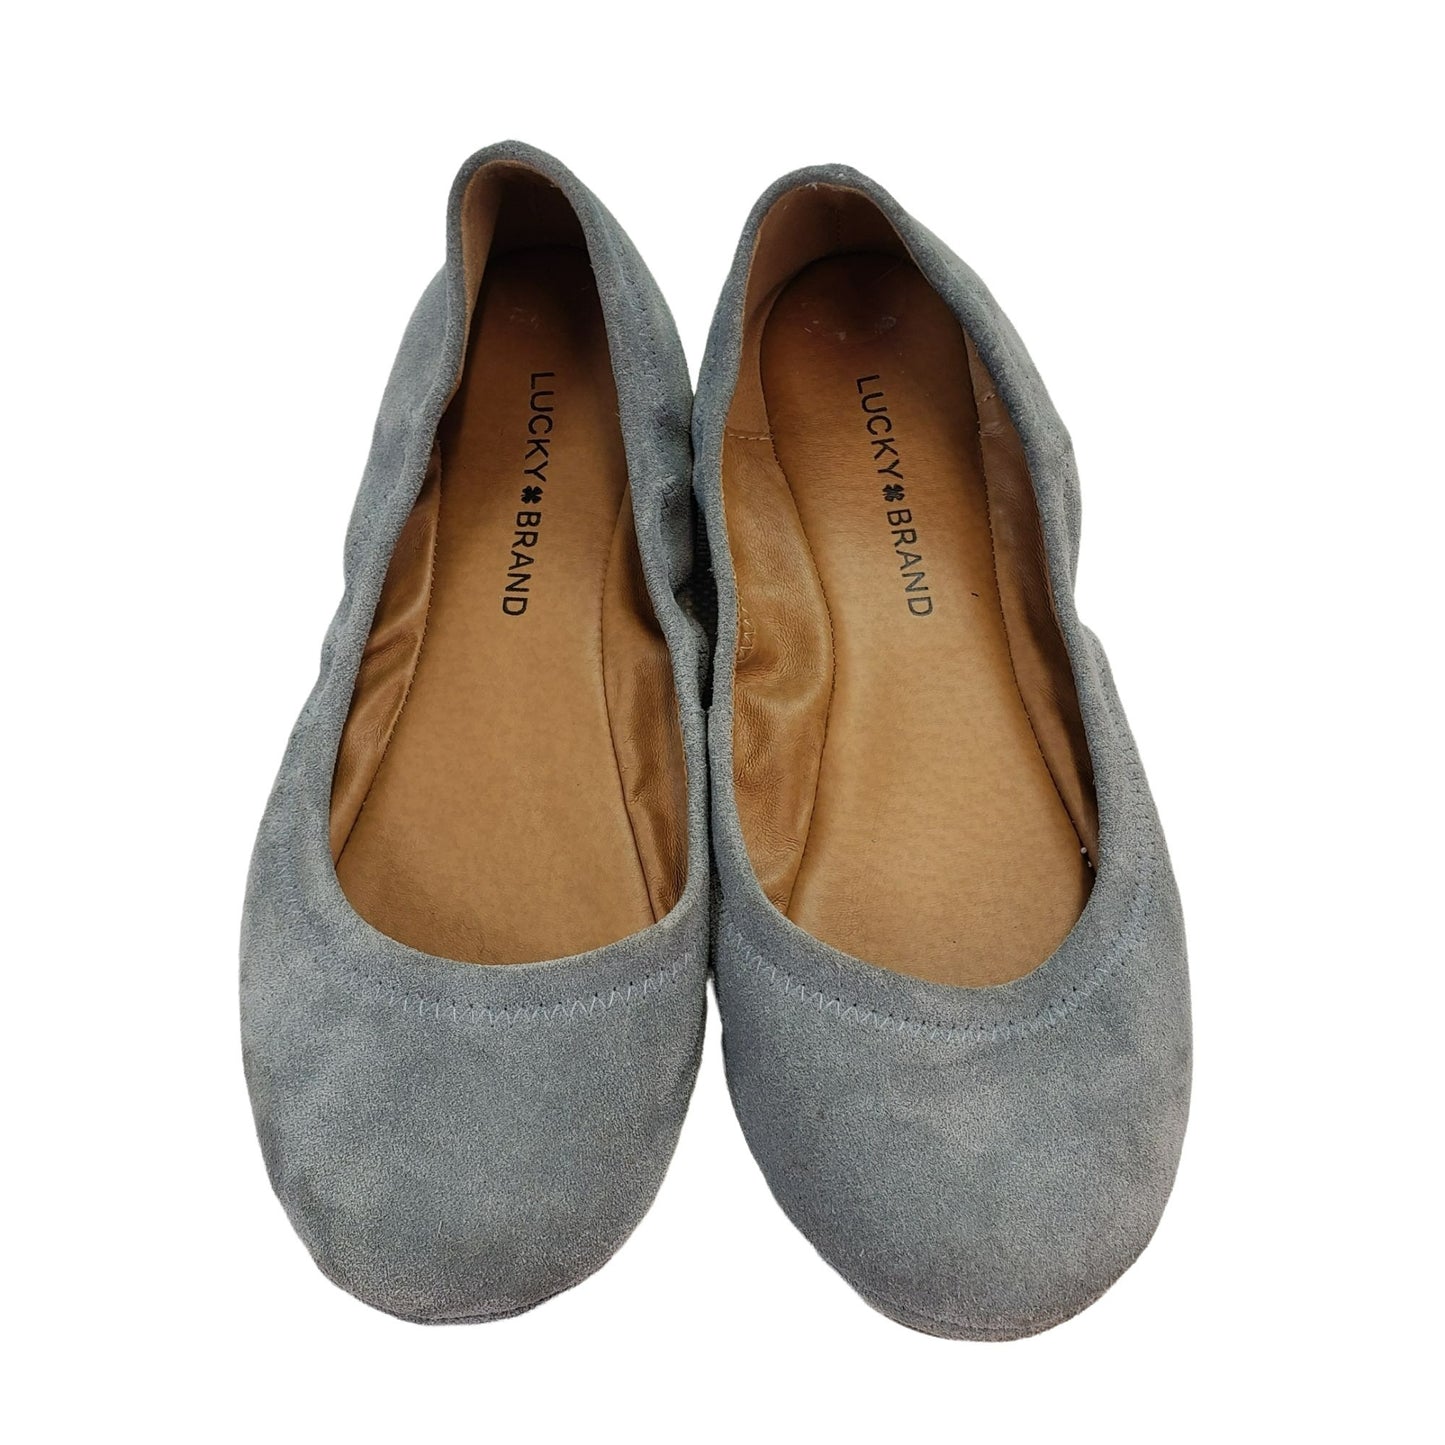 Lucky Brand Erin Suede Leather Ballet Flats Size 8.5